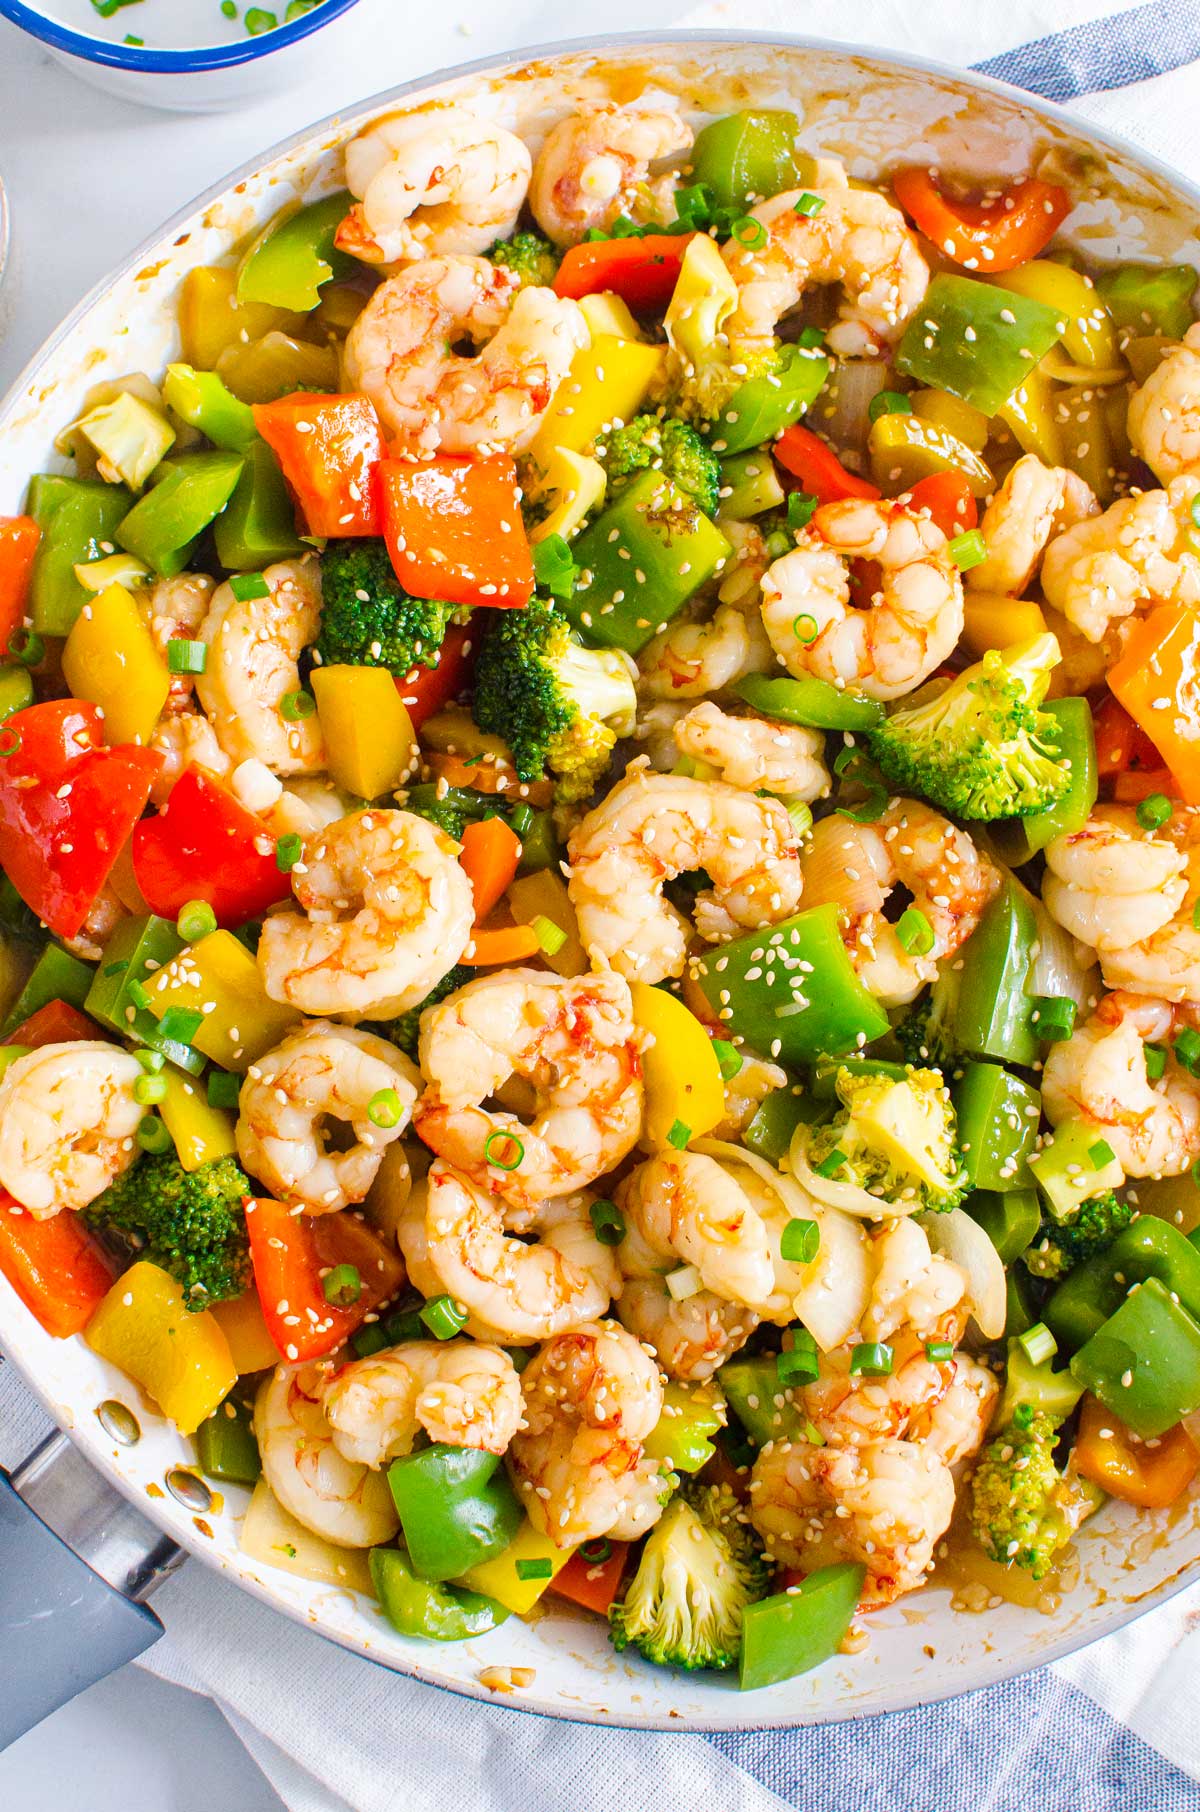 shrimp and vegetables in stir fry pan with sesame seeds and a light blue striped linen